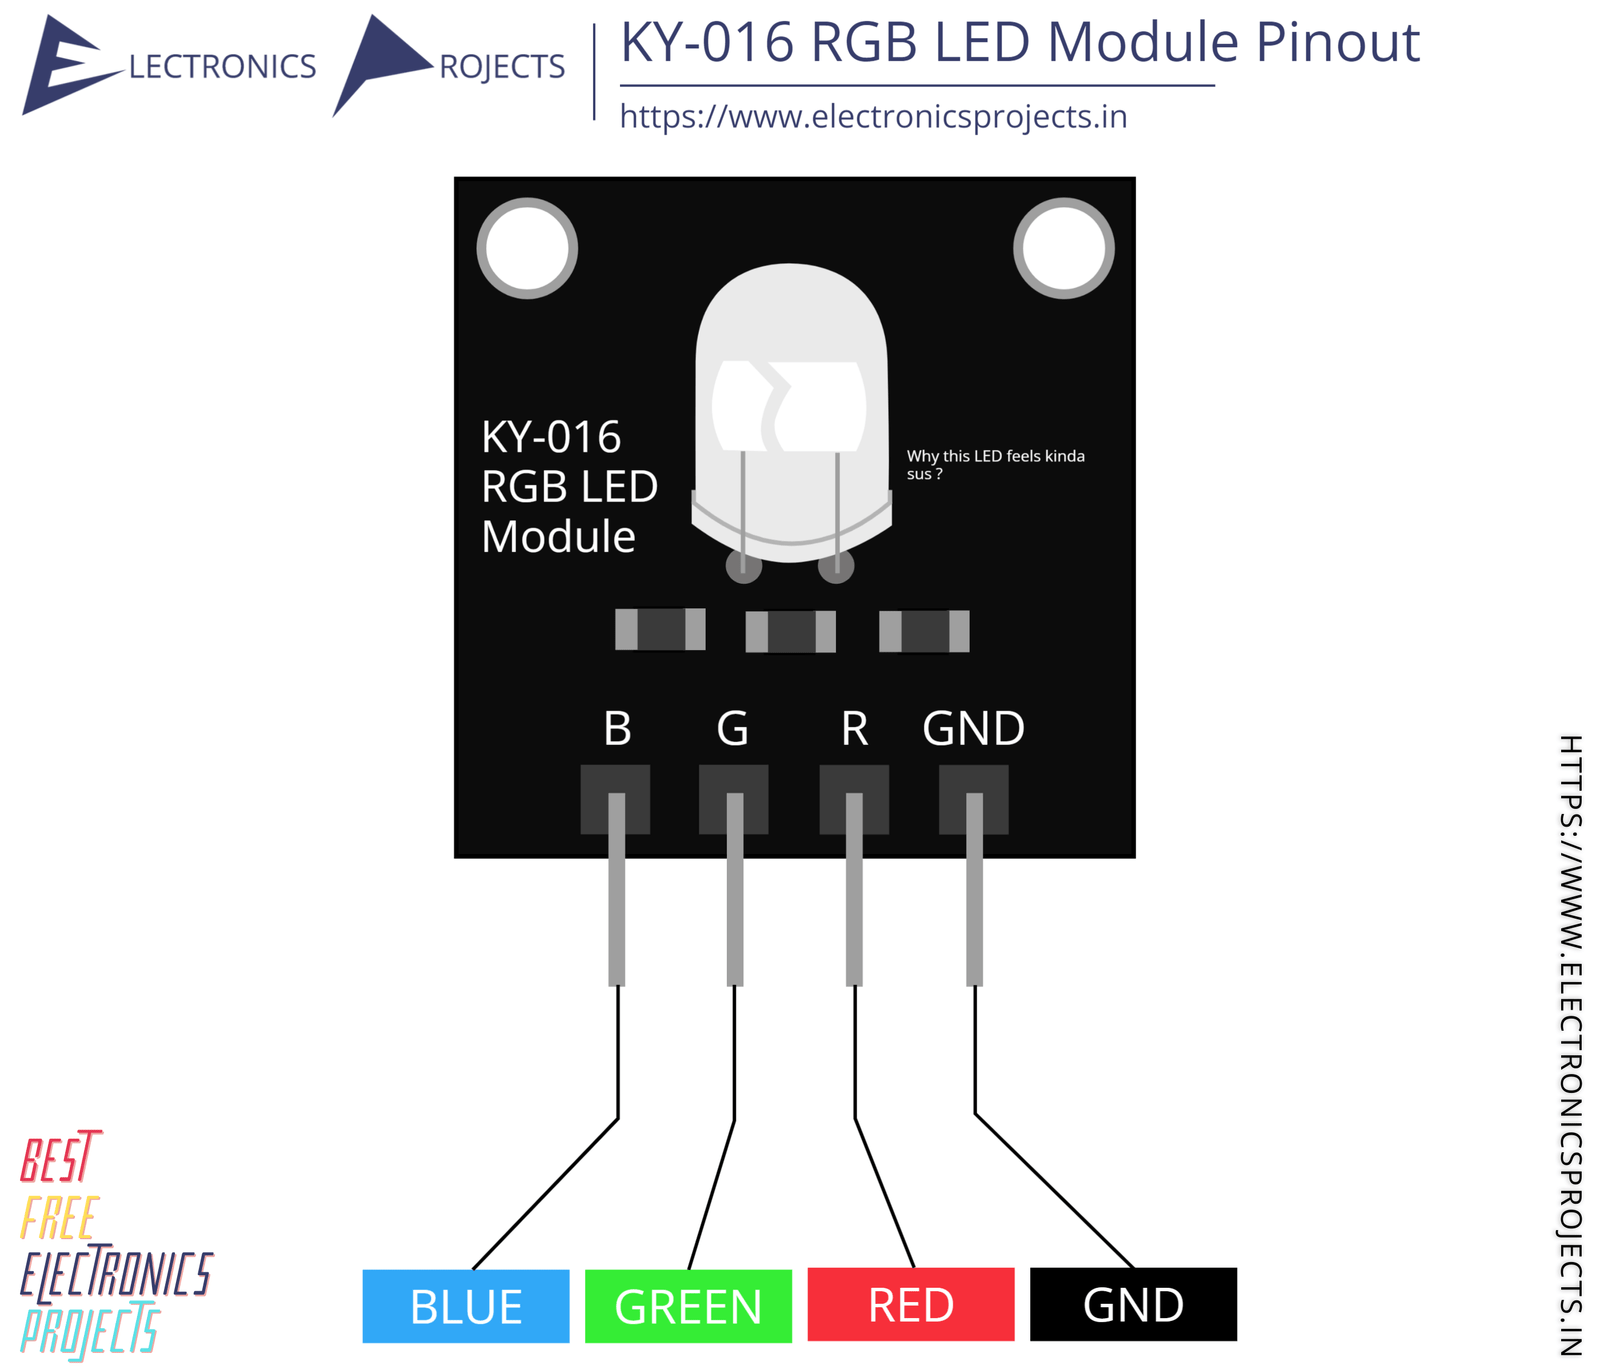 RGB LED Module and Projects Electronics